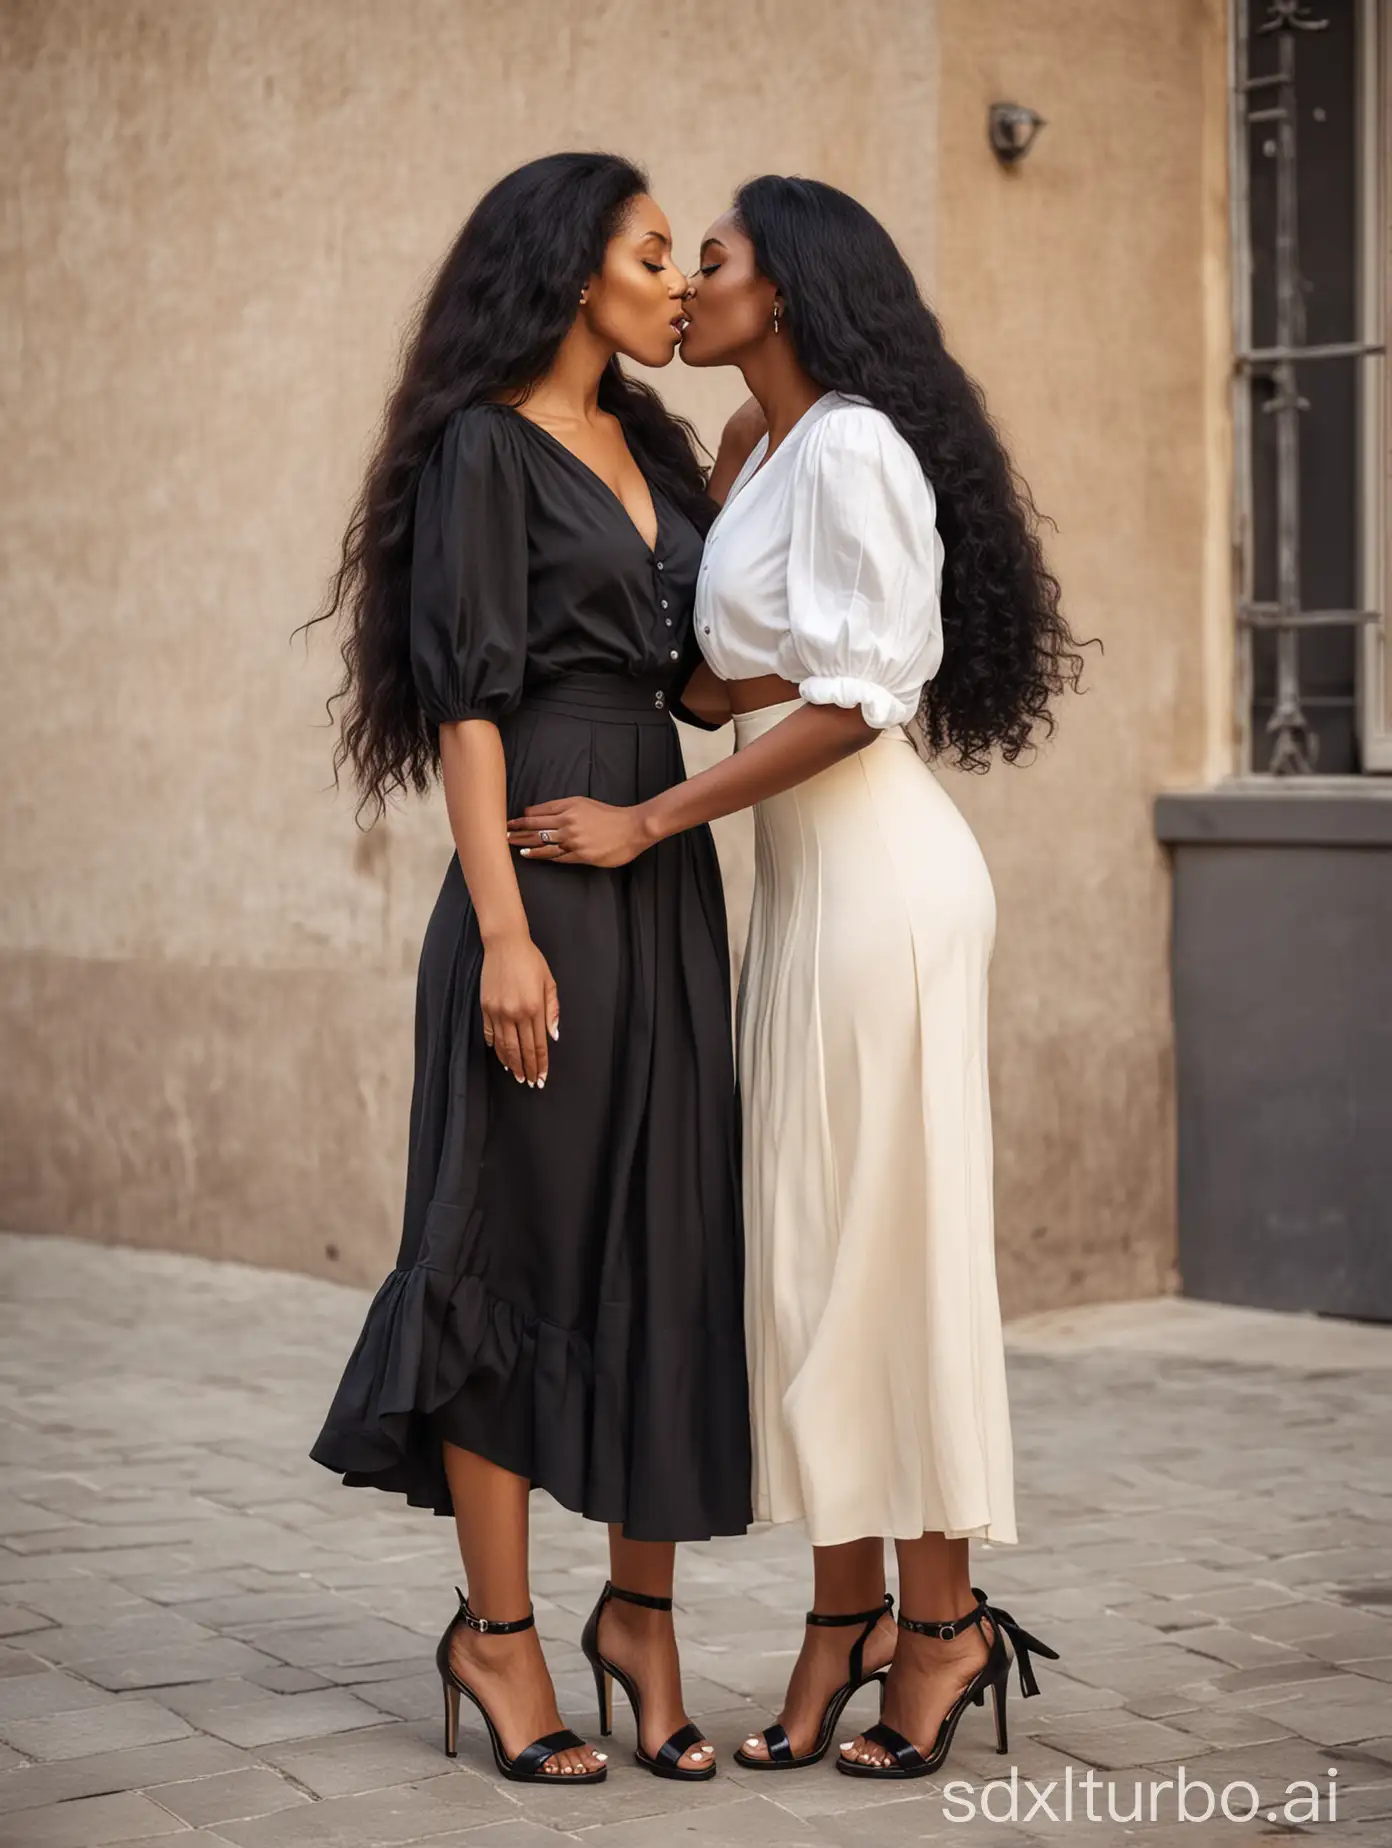 Two-Black-Women-Embracing-in-Stylish-Tight-Clothing-and-High-Heels